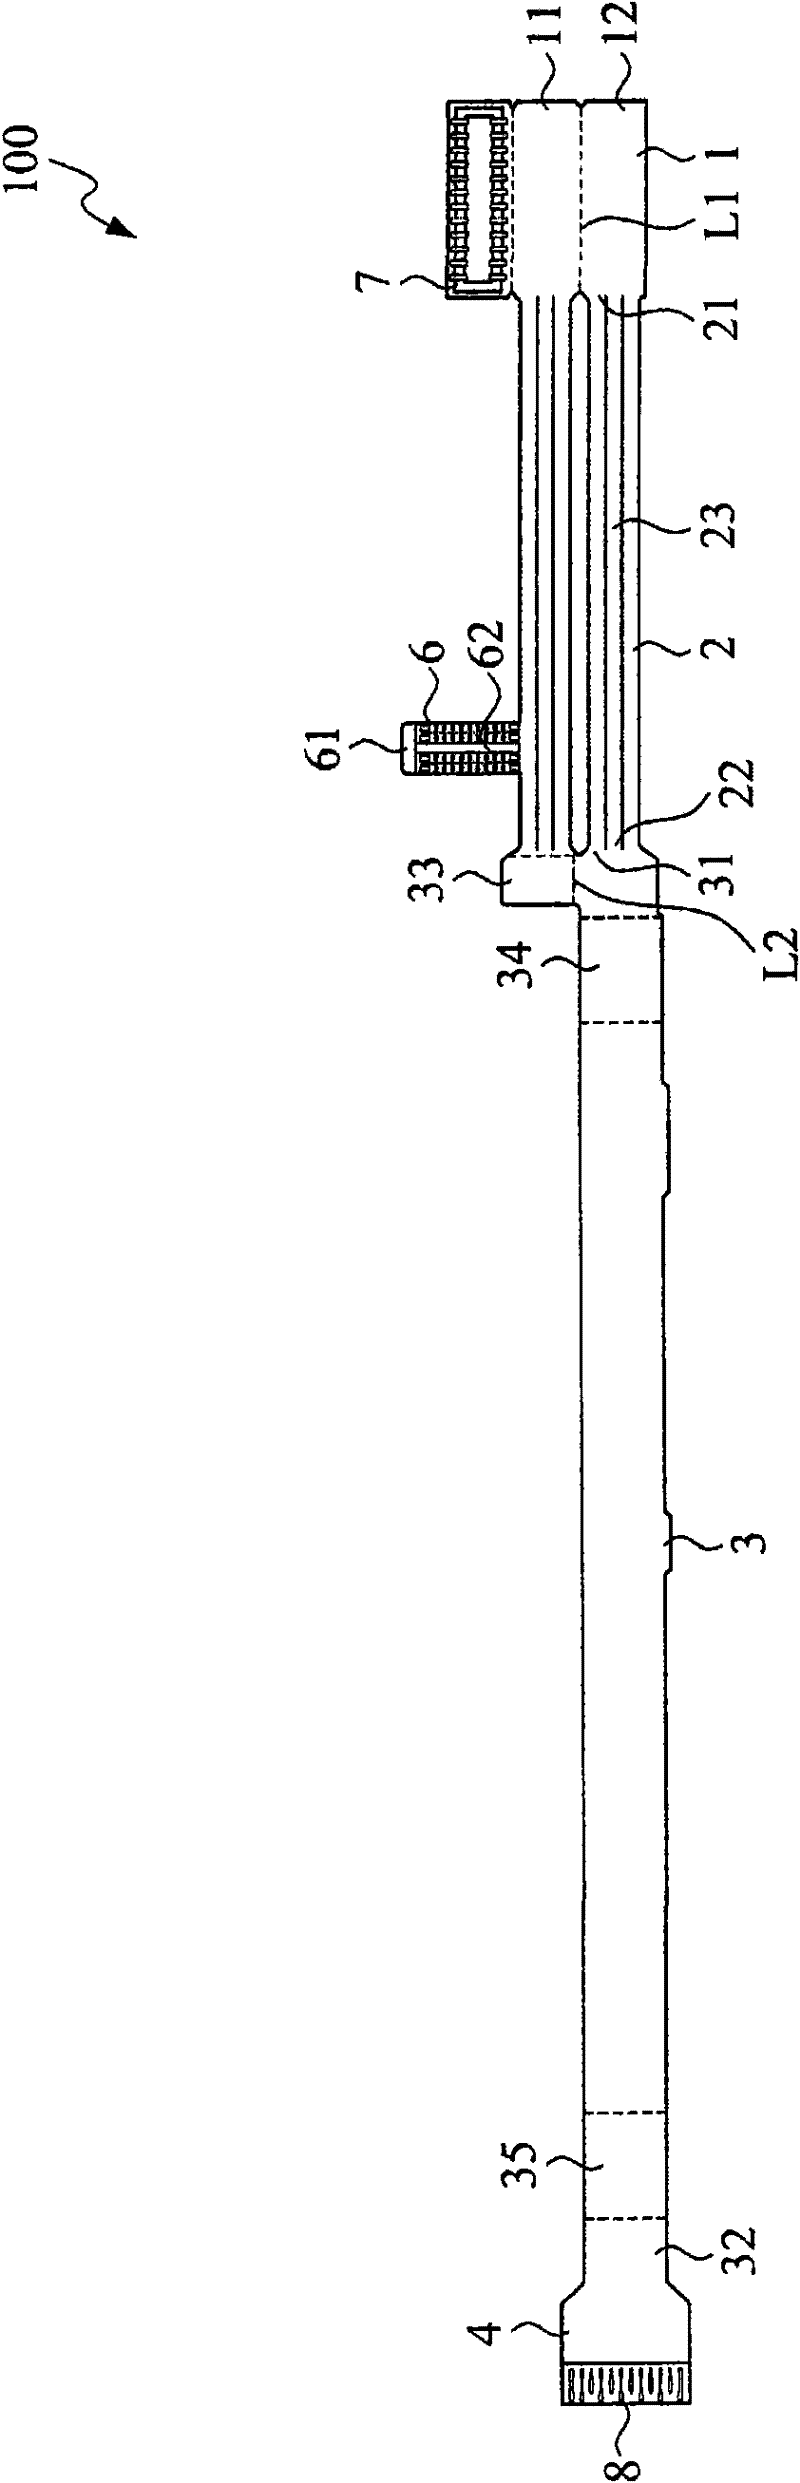 Flexible circuit cable with cluster section